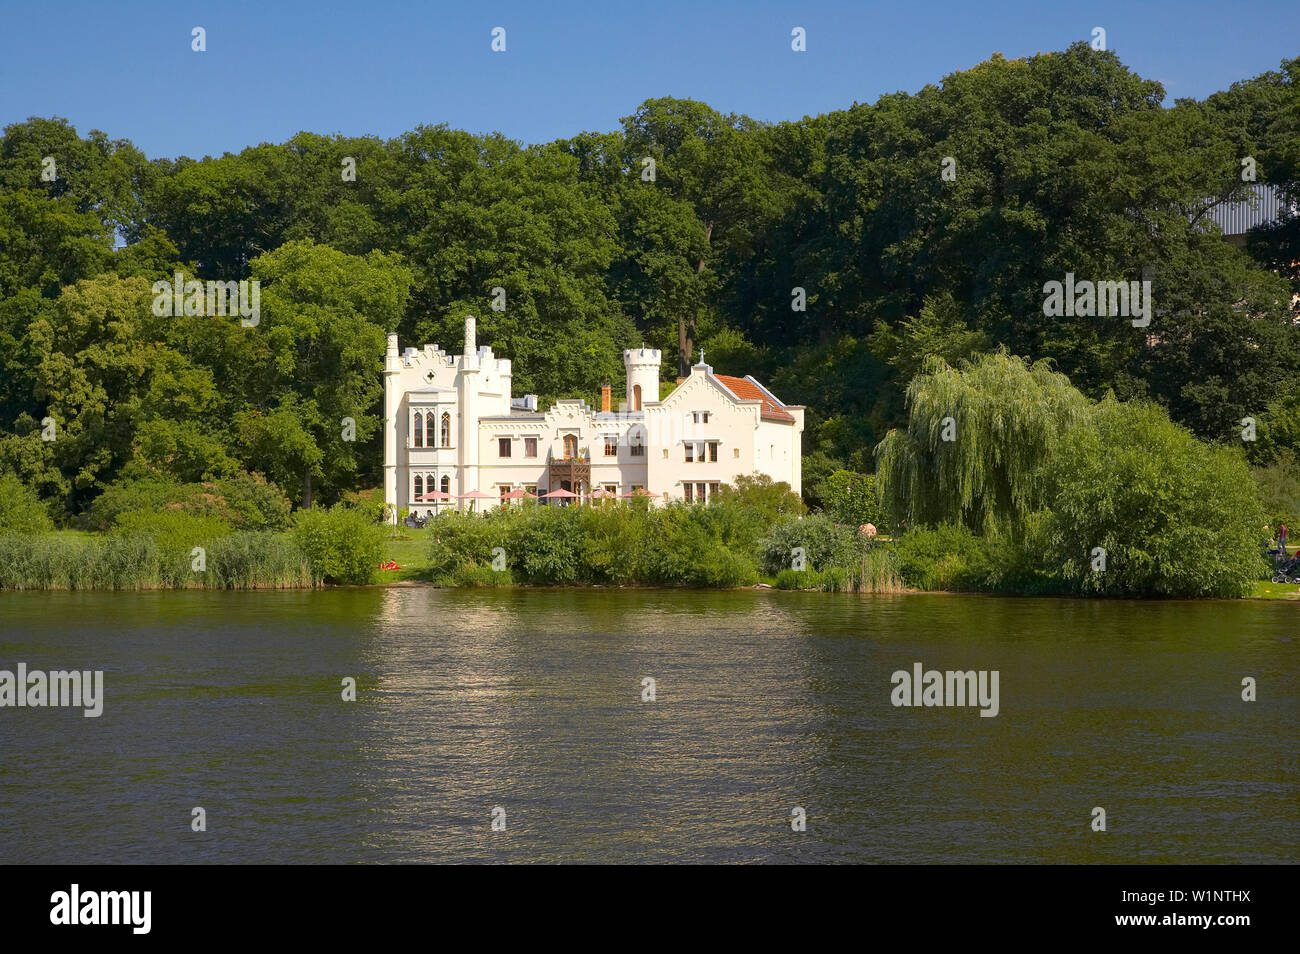 Kleines Schloß in the park of Babelsberg with the river Havel, Brandenburg, Germany, Europe Stock Photo